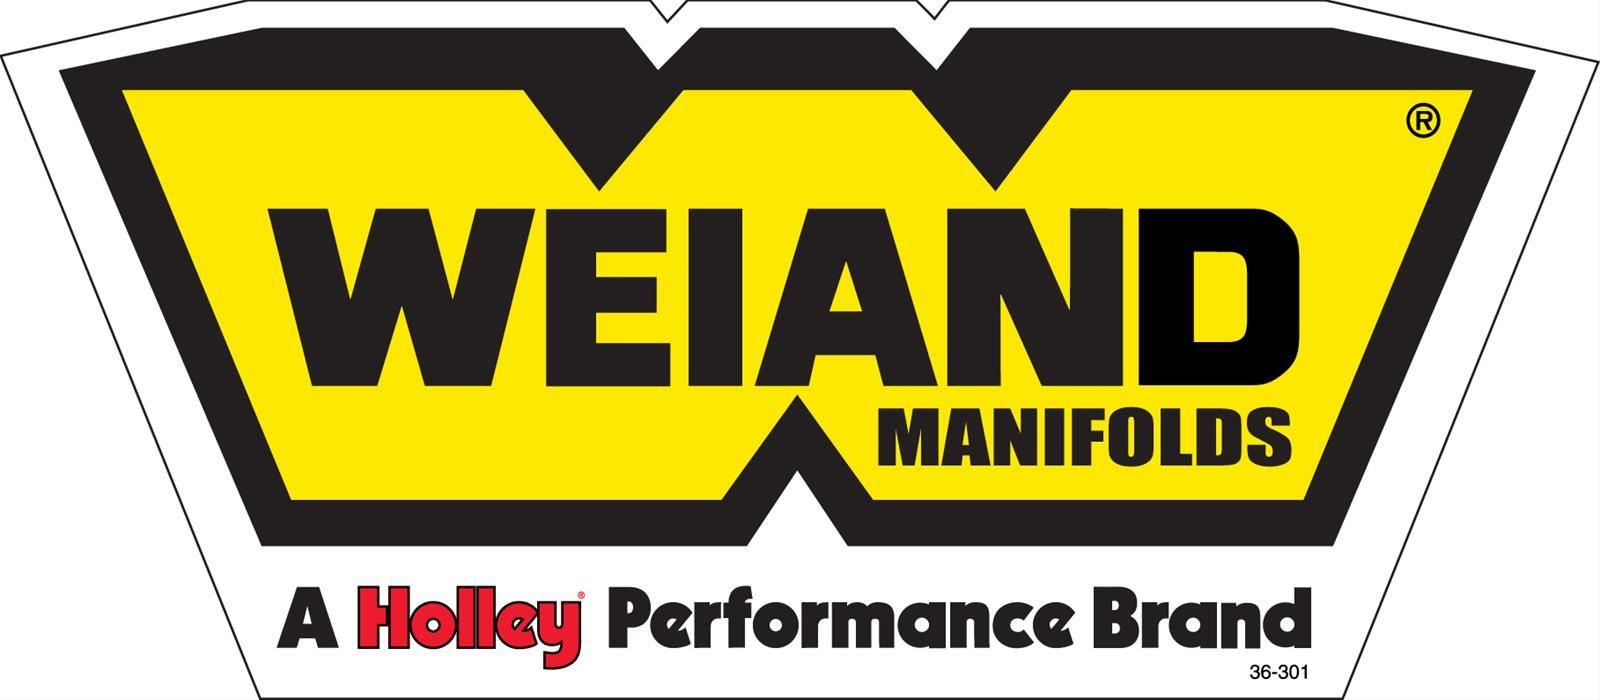 Weiand Logo - Details About Weiand 36 301 Decal Vinyl Weiand Manifolds Logo Yellow Black Each